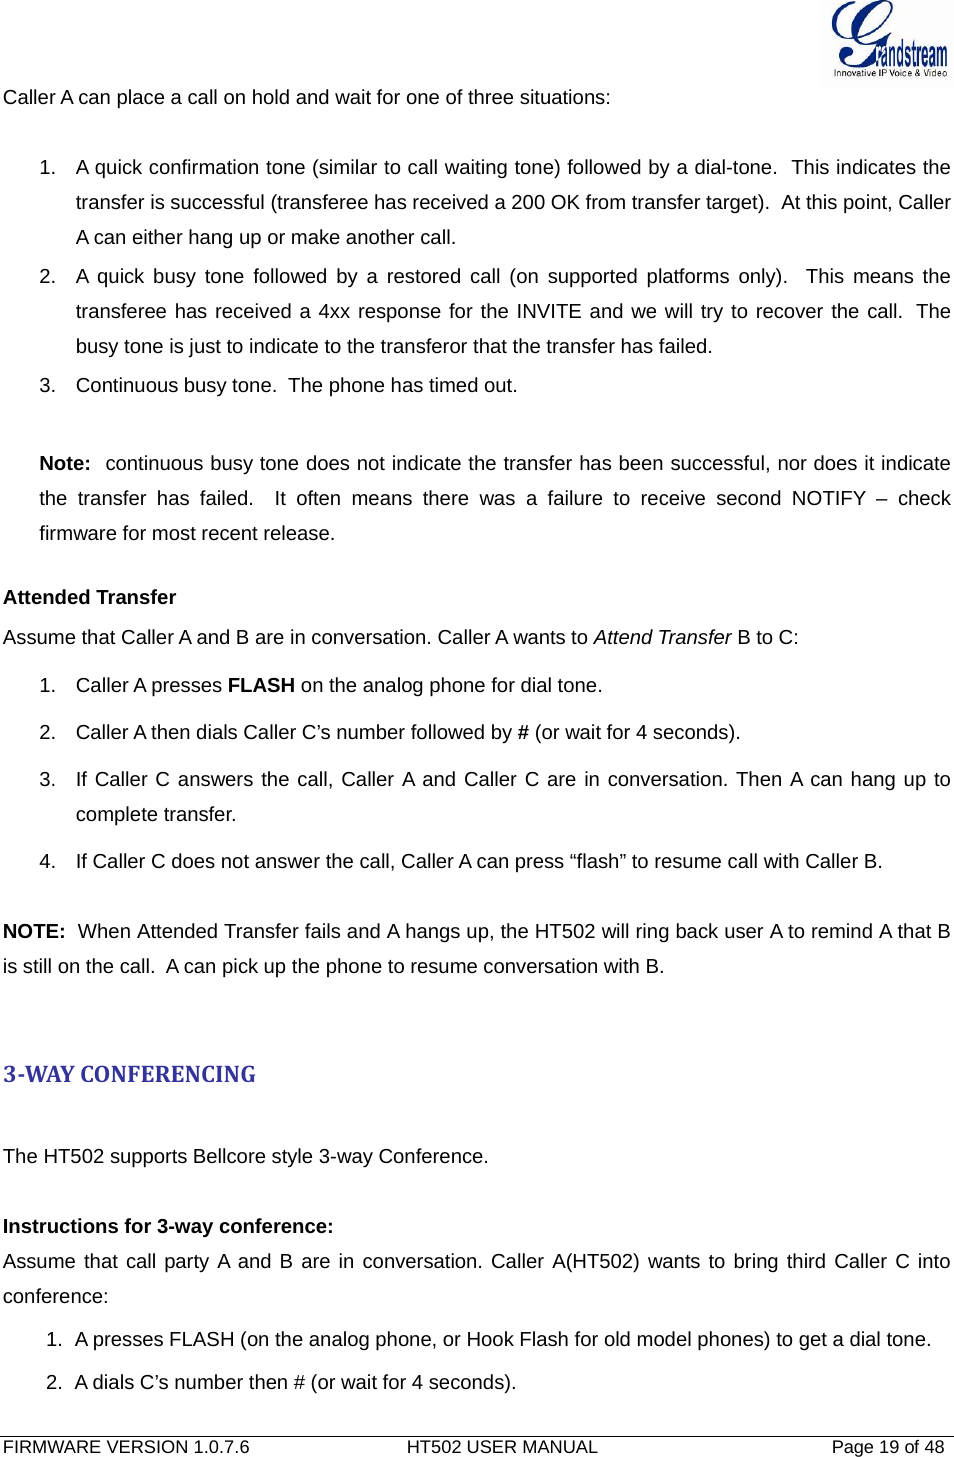  FIRMWARE VERSION 1.0.7.6                               HT502 USER MANUAL                                              Page 19 of 48   Caller A can place a call on hold and wait for one of three situations:    1.  A quick confirmation tone (similar to call waiting tone) followed by a dial-tone.  This indicates the transfer is successful (transferee has received a 200 OK from transfer target).  At this point, Caller A can either hang up or make another call.  2.  A quick busy tone followed by a restored call (on supported platforms only).  This means the transferee has received a 4xx response for the INVITE and we will try to recover the call.  The busy tone is just to indicate to the transferor that the transfer has failed.  3.  Continuous busy tone.  The phone has timed out.    Note:  continuous busy tone does not indicate the transfer has been successful, nor does it indicate the transfer has failed.  It often means there was a failure to receive second NOTIFY – check firmware for most recent release.  Attended Transfer Assume that Caller A and B are in conversation. Caller A wants to Attend Transfer B to C: 1. Caller A presses FLASH on the analog phone for dial tone. 2.  Caller A then dials Caller C’s number followed by # (or wait for 4 seconds). 3.  If Caller C answers the call, Caller A and Caller C are in conversation. Then A can hang up to complete transfer. 4.  If Caller C does not answer the call, Caller A can press “flash” to resume call with Caller B.   NOTE:  When Attended Transfer fails and A hangs up, the HT502 will ring back user A to remind A that B is still on the call.  A can pick up the phone to resume conversation with B.   3WAYCONFERENCINGThe HT502 supports Bellcore style 3-way Conference.   Instructions for 3-way conference: Assume that call party A and B are in conversation. Caller A(HT502) wants to bring third Caller C into conference: 1.  A presses FLASH (on the analog phone, or Hook Flash for old model phones) to get a dial tone. 2.  A dials C’s number then # (or wait for 4 seconds).  